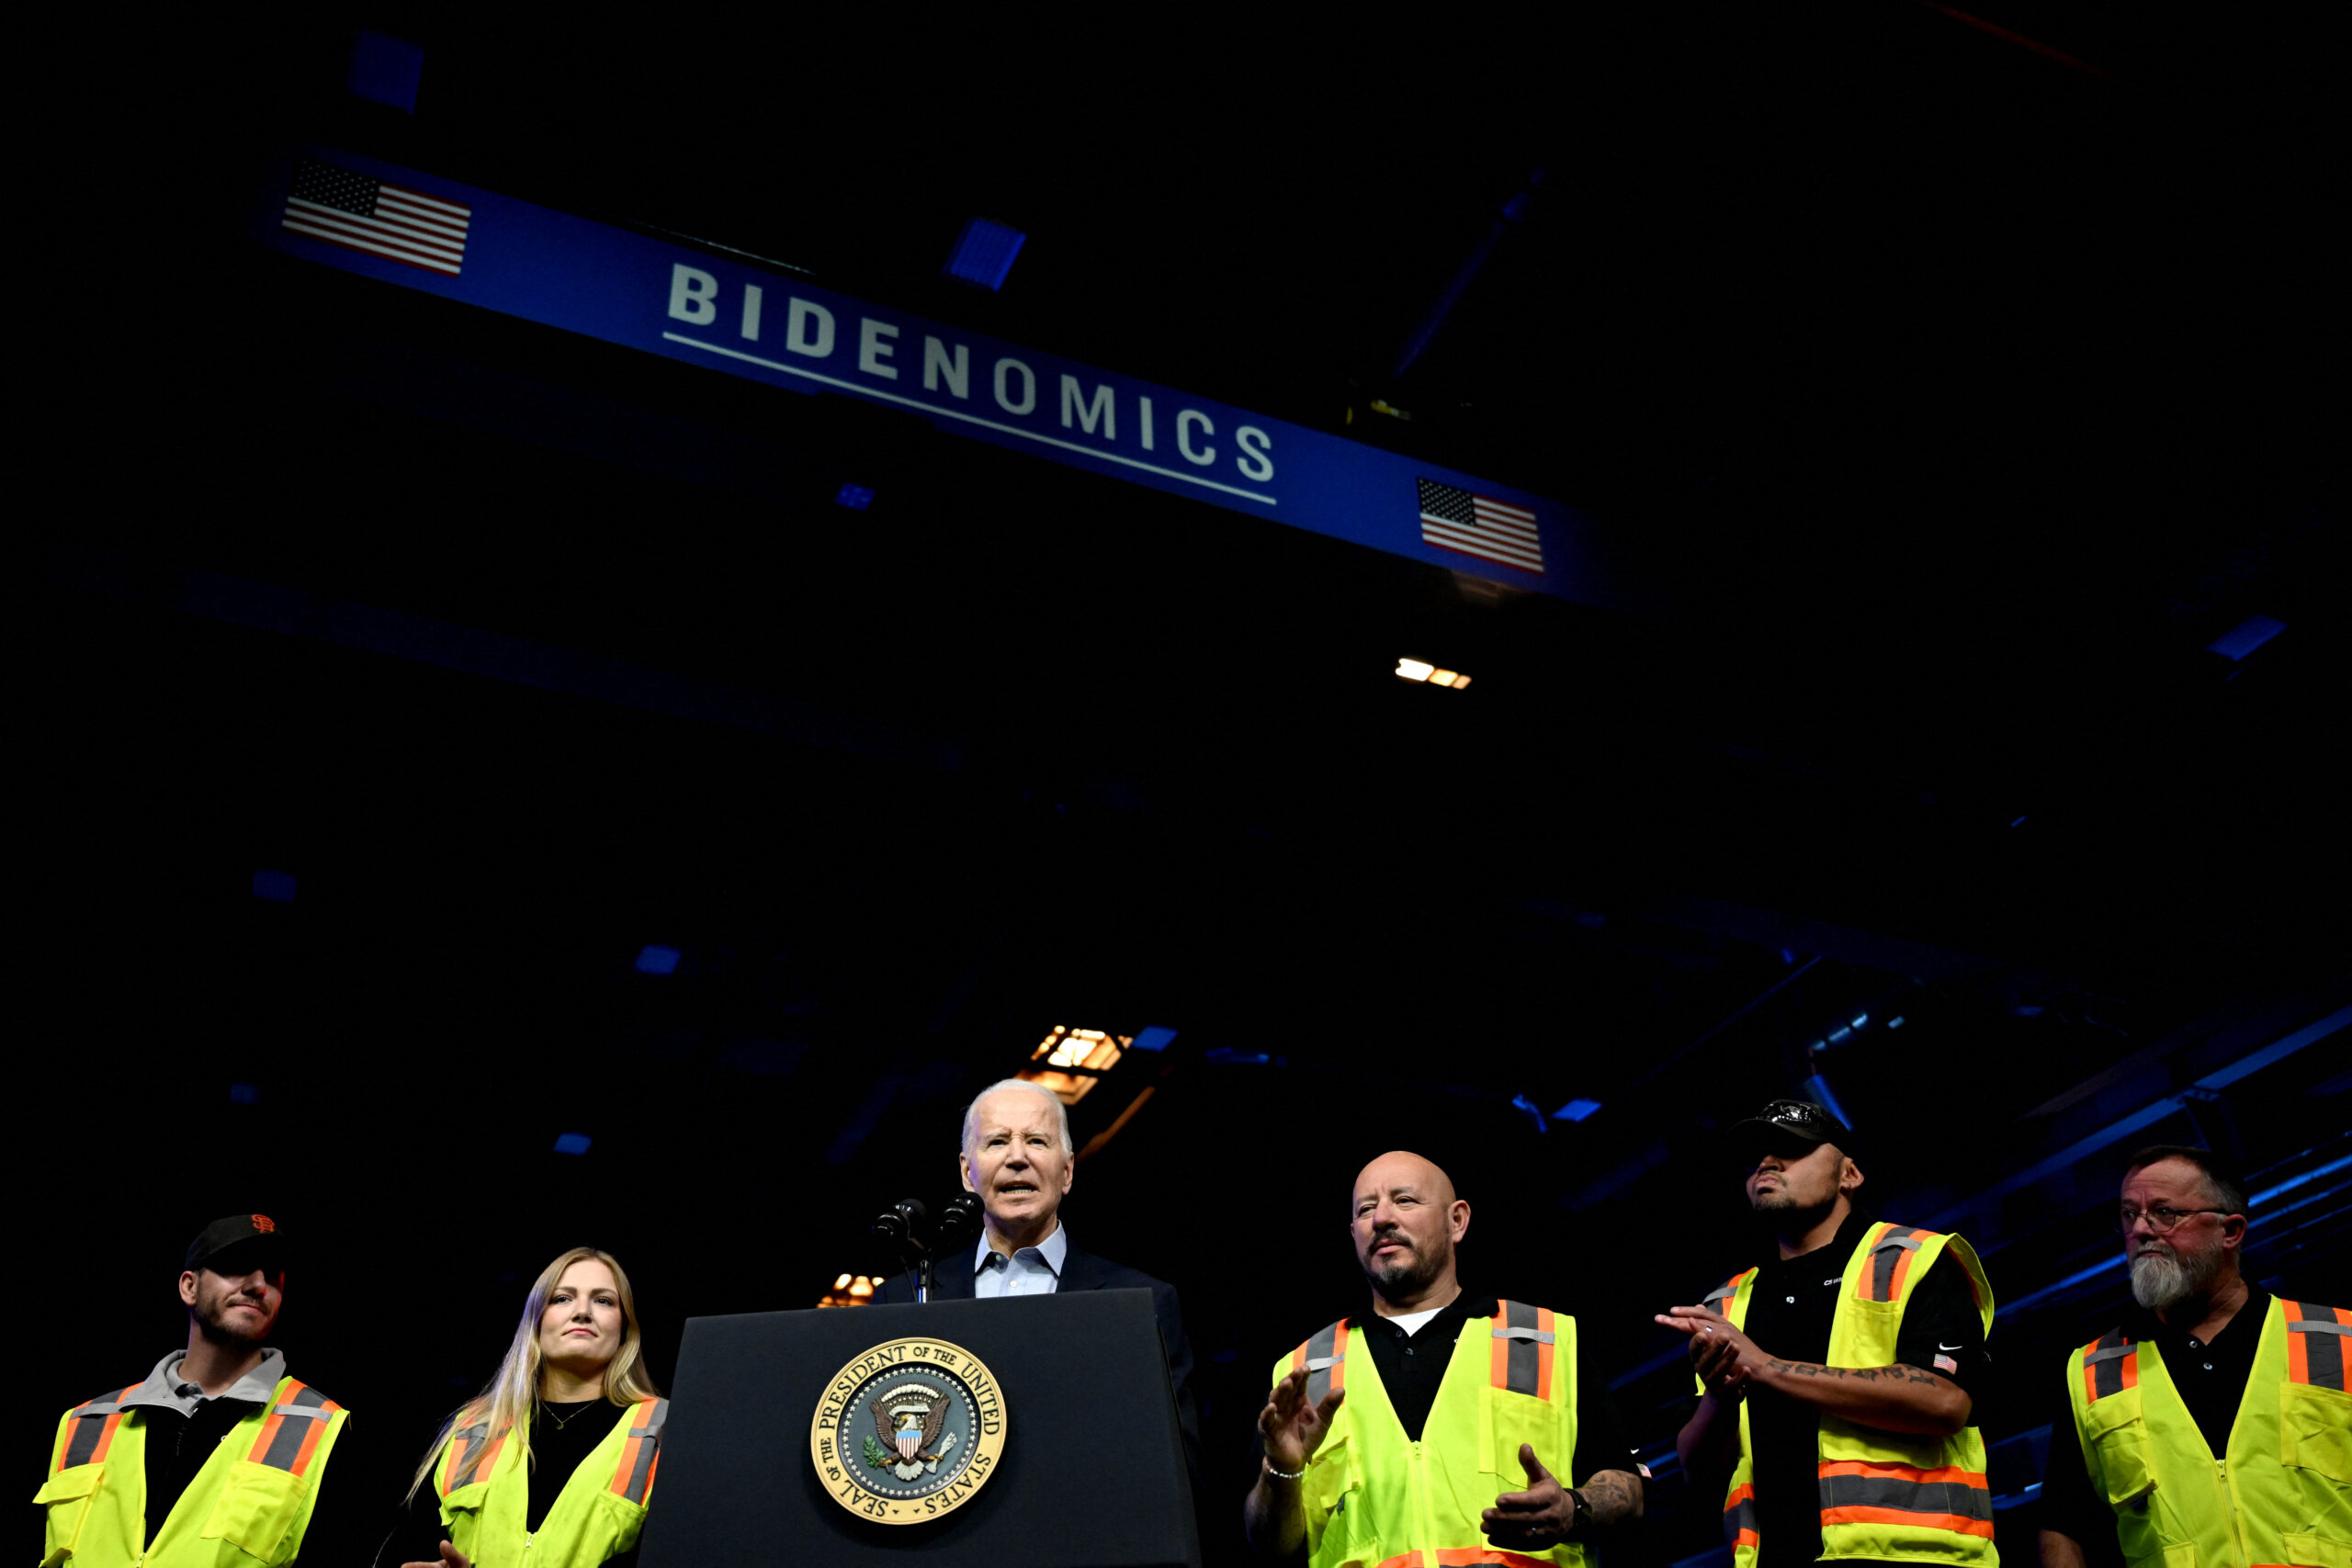 The economic policies of President Biden, known as "Bidenomics," are receiving widespread praise internationally, beyond the borders of the United States.